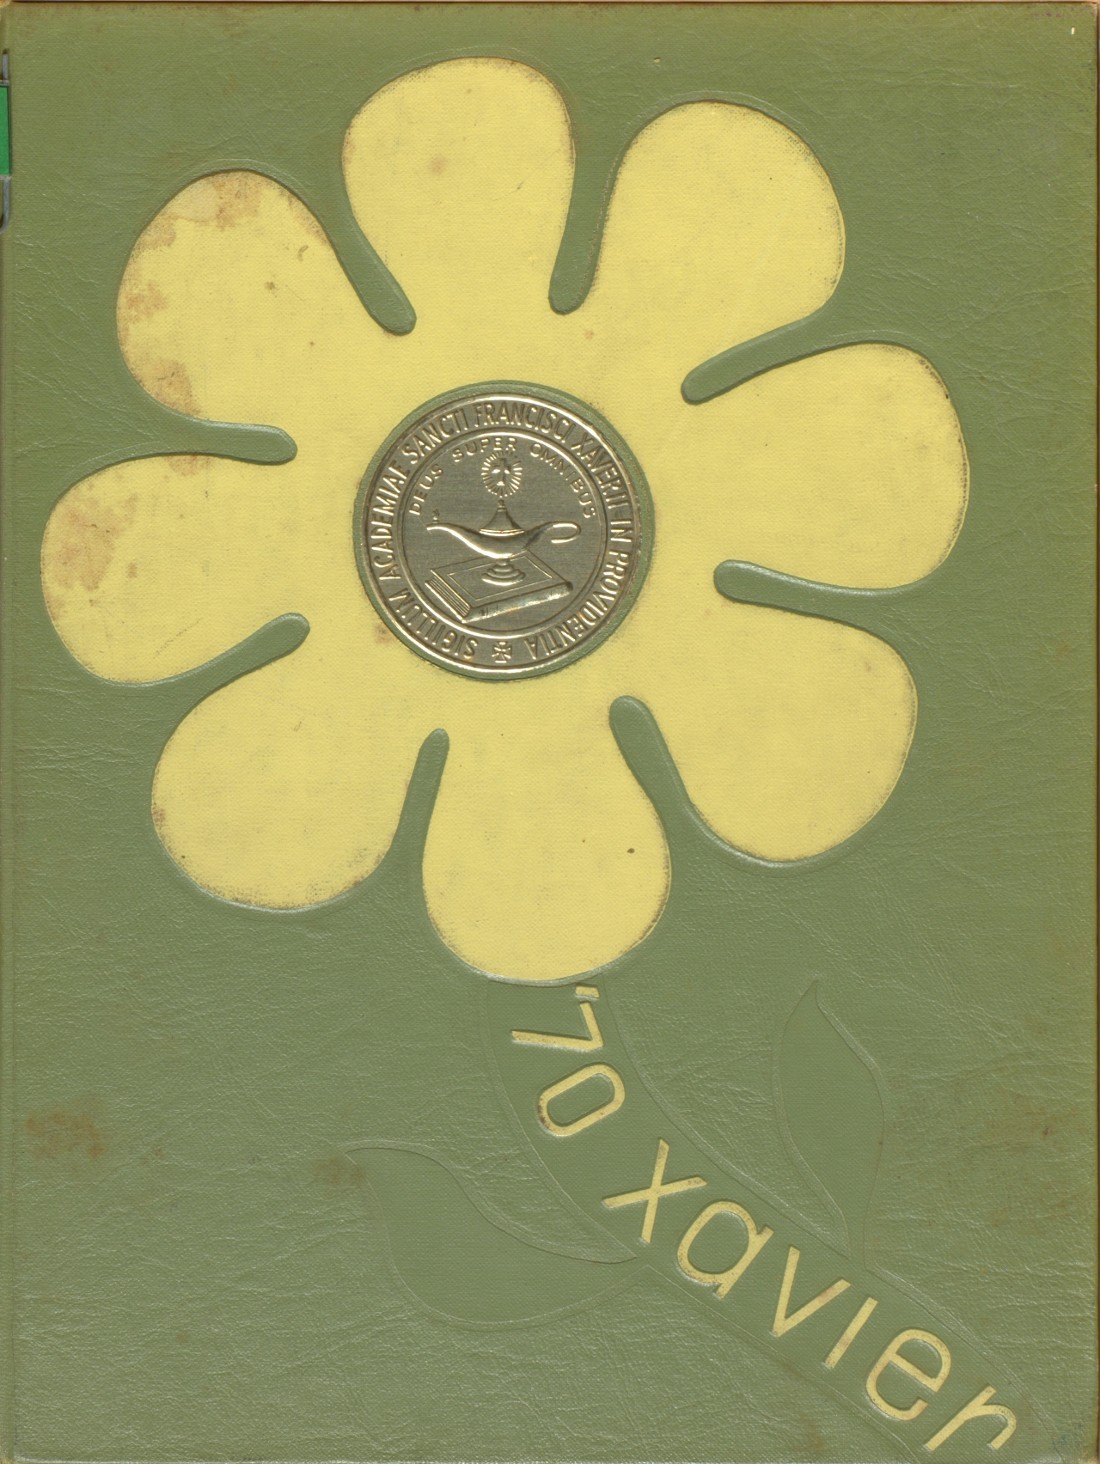 1970-yearbook-from-st-xavier-high-school-from-providence-rhode-island